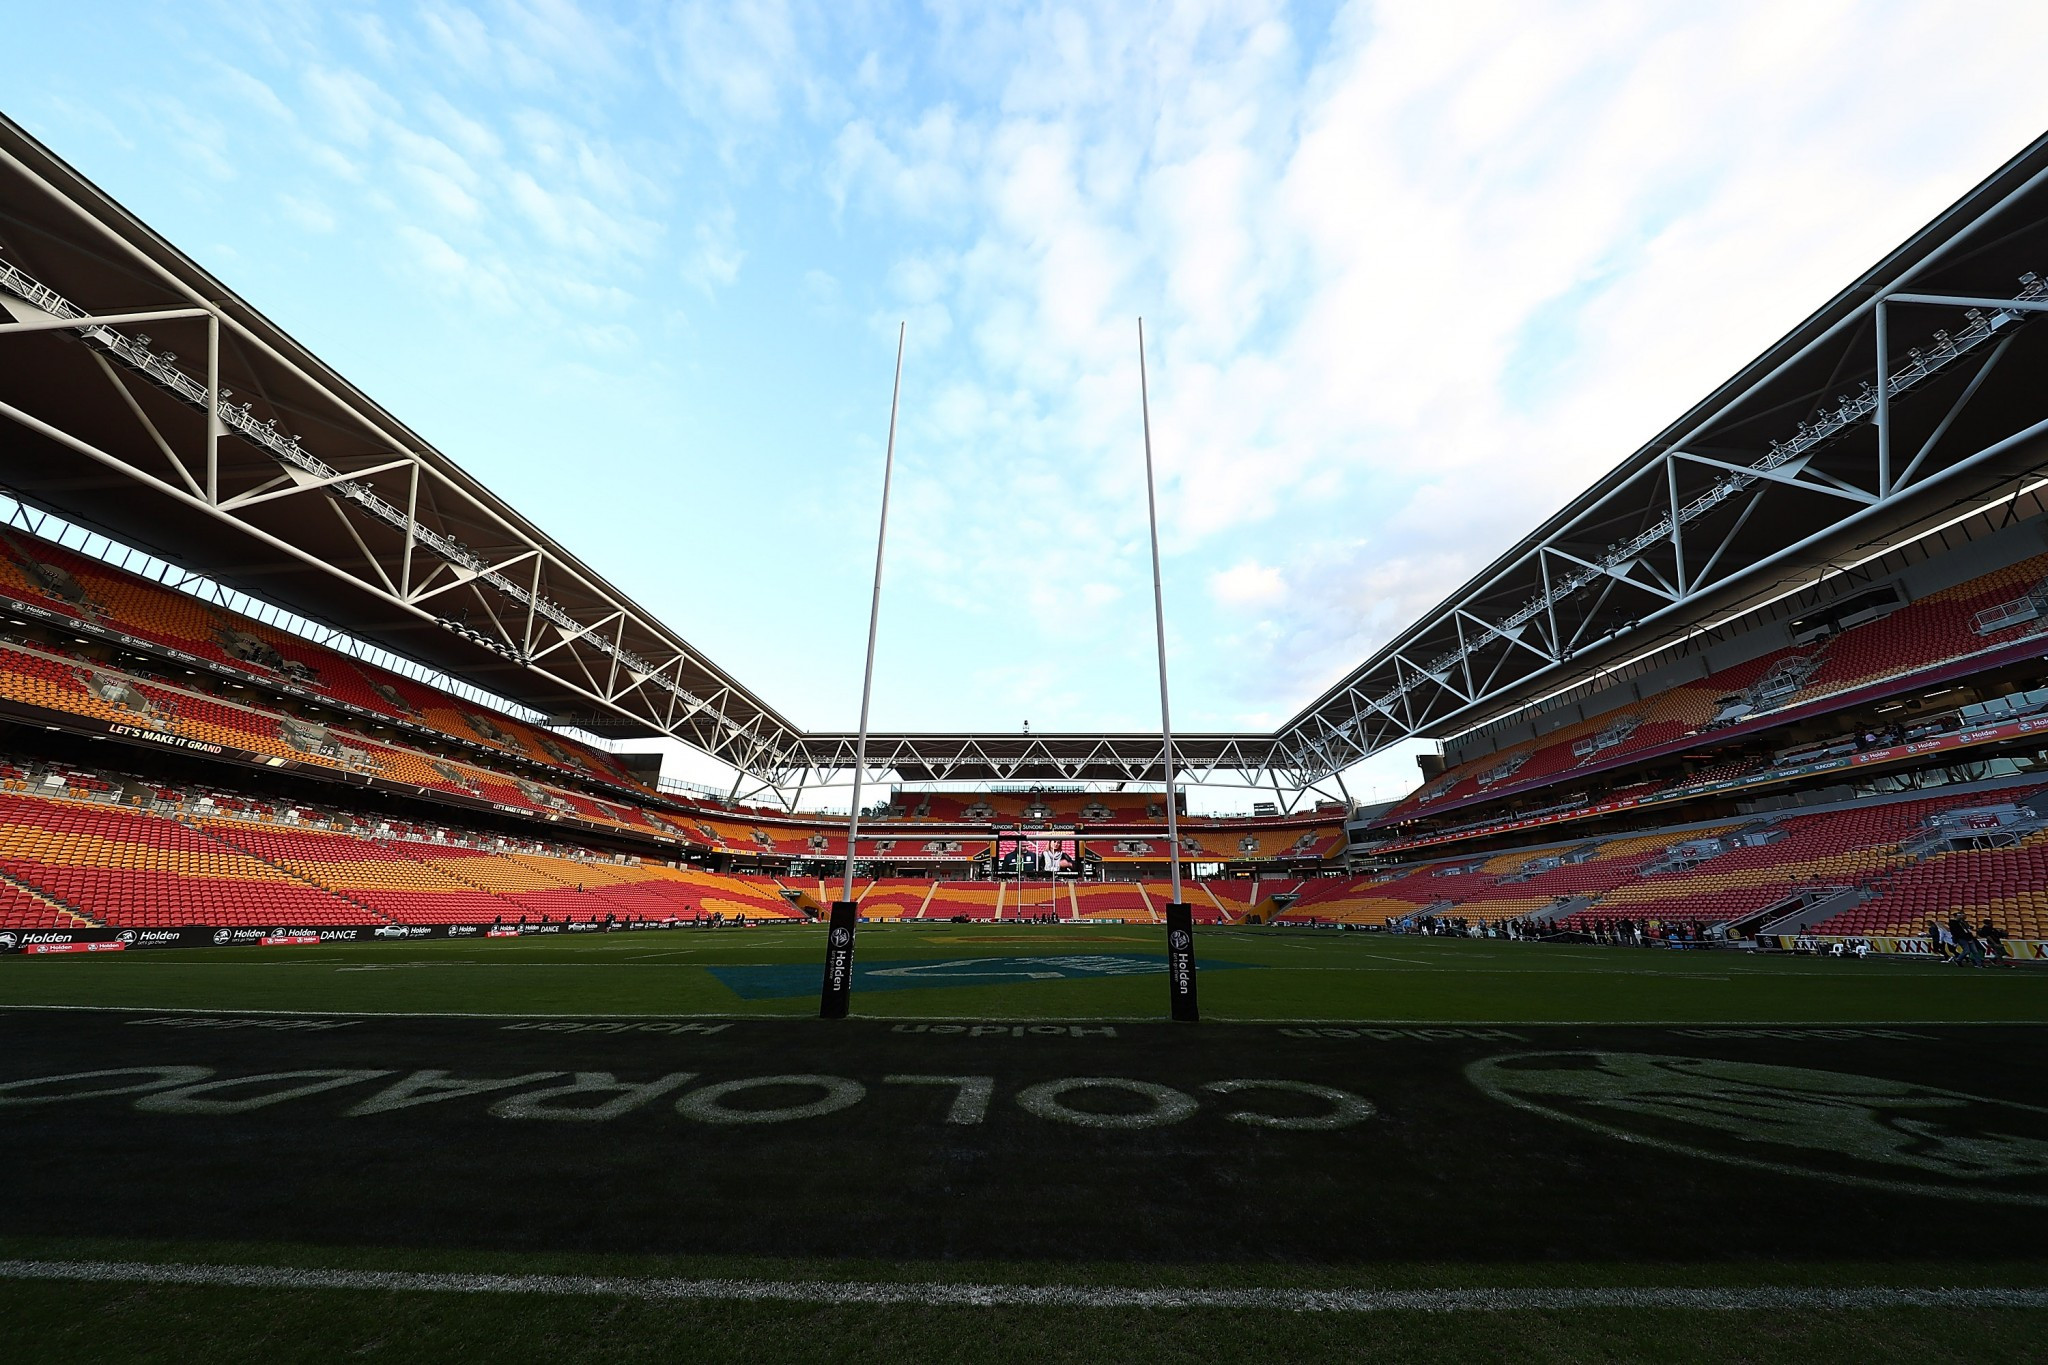 The Suncorp Stadium has received around AUD 43 million in renovations in the last 10 years since it was redeveloped in 2003 ©Getty Images